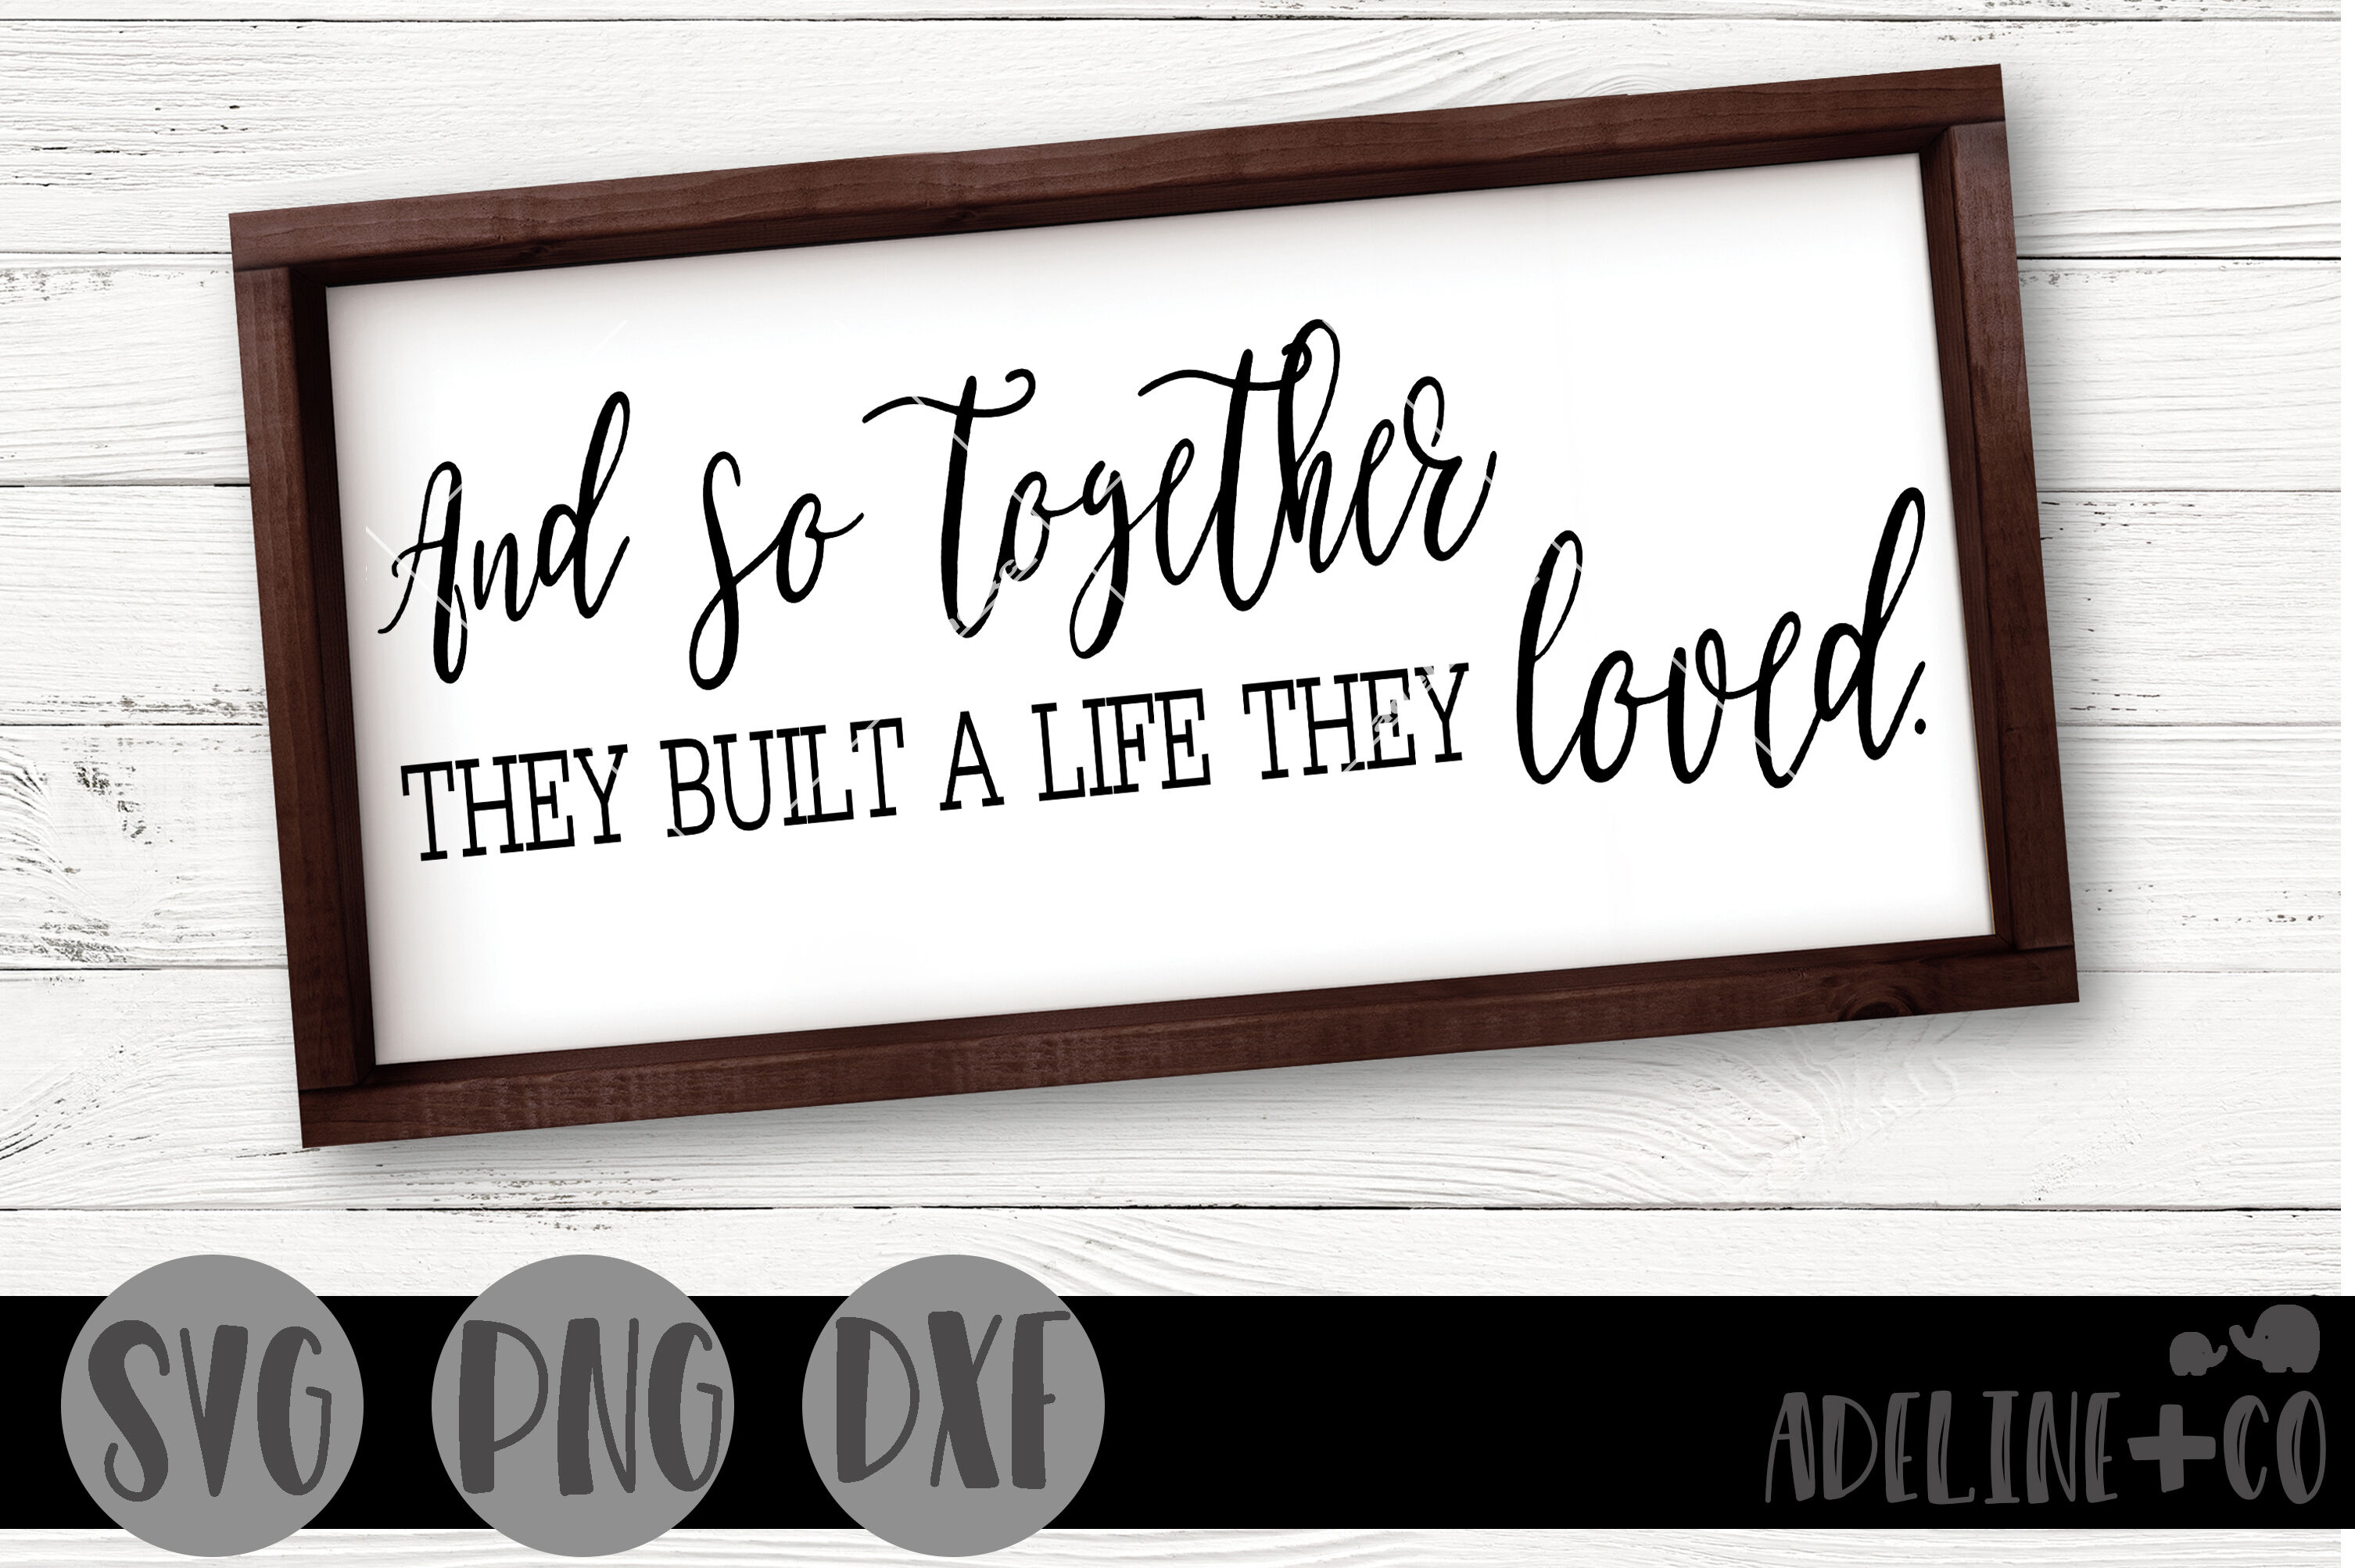 And So Together They Built a Life They Loved SVG DXF JPG Cut Cricut Silhouette File